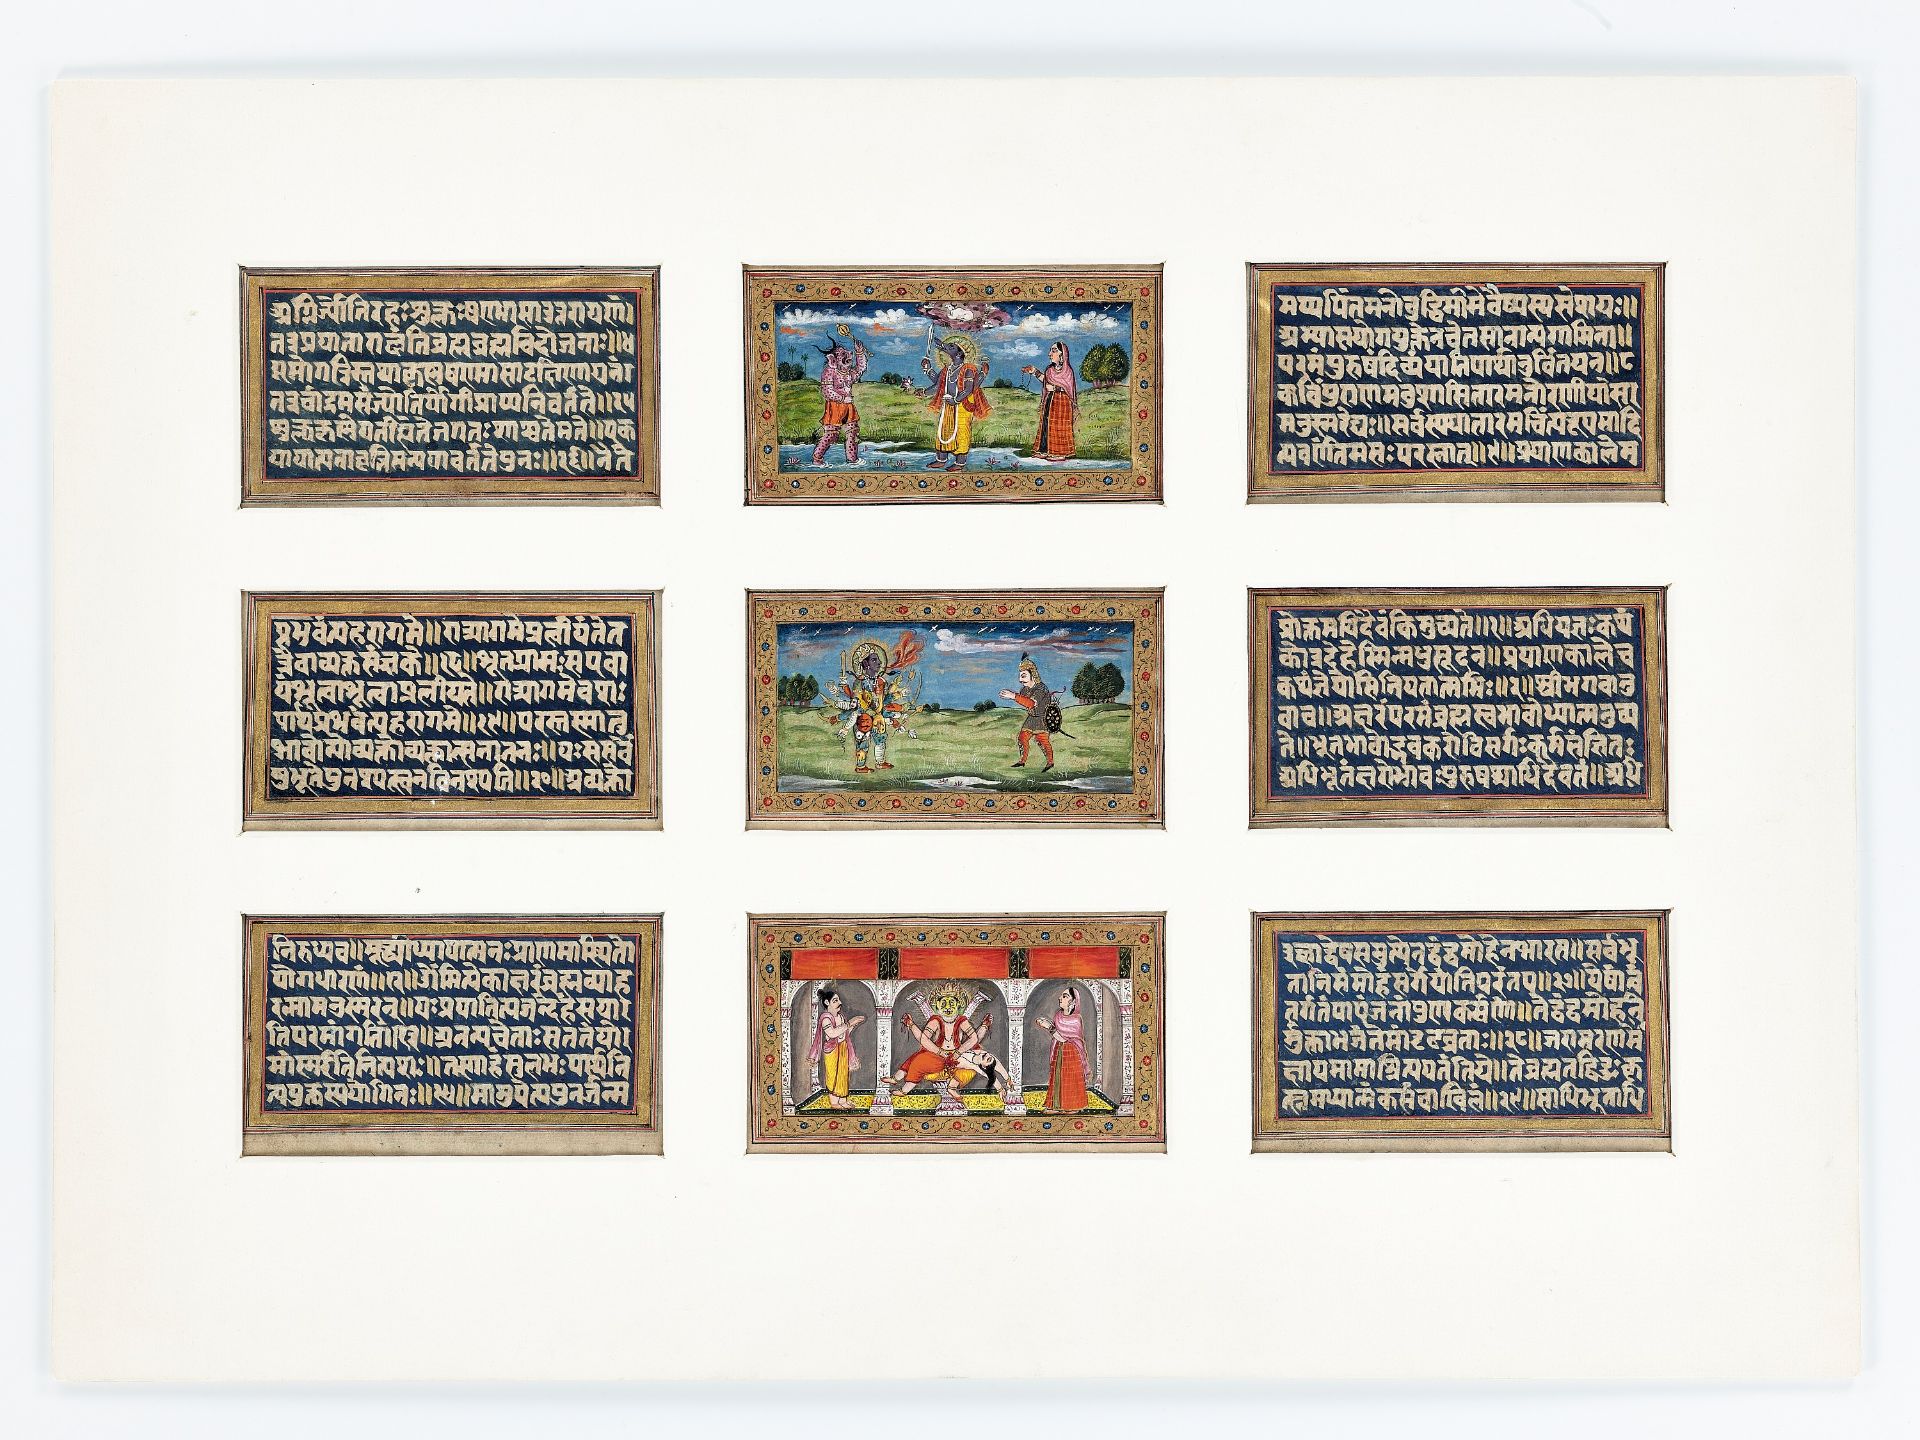 A RARE GROUP OF 27 FOLIOS FROM A MANUSCRIPT, KASHMIR 18TH CENTURY - Image 14 of 15